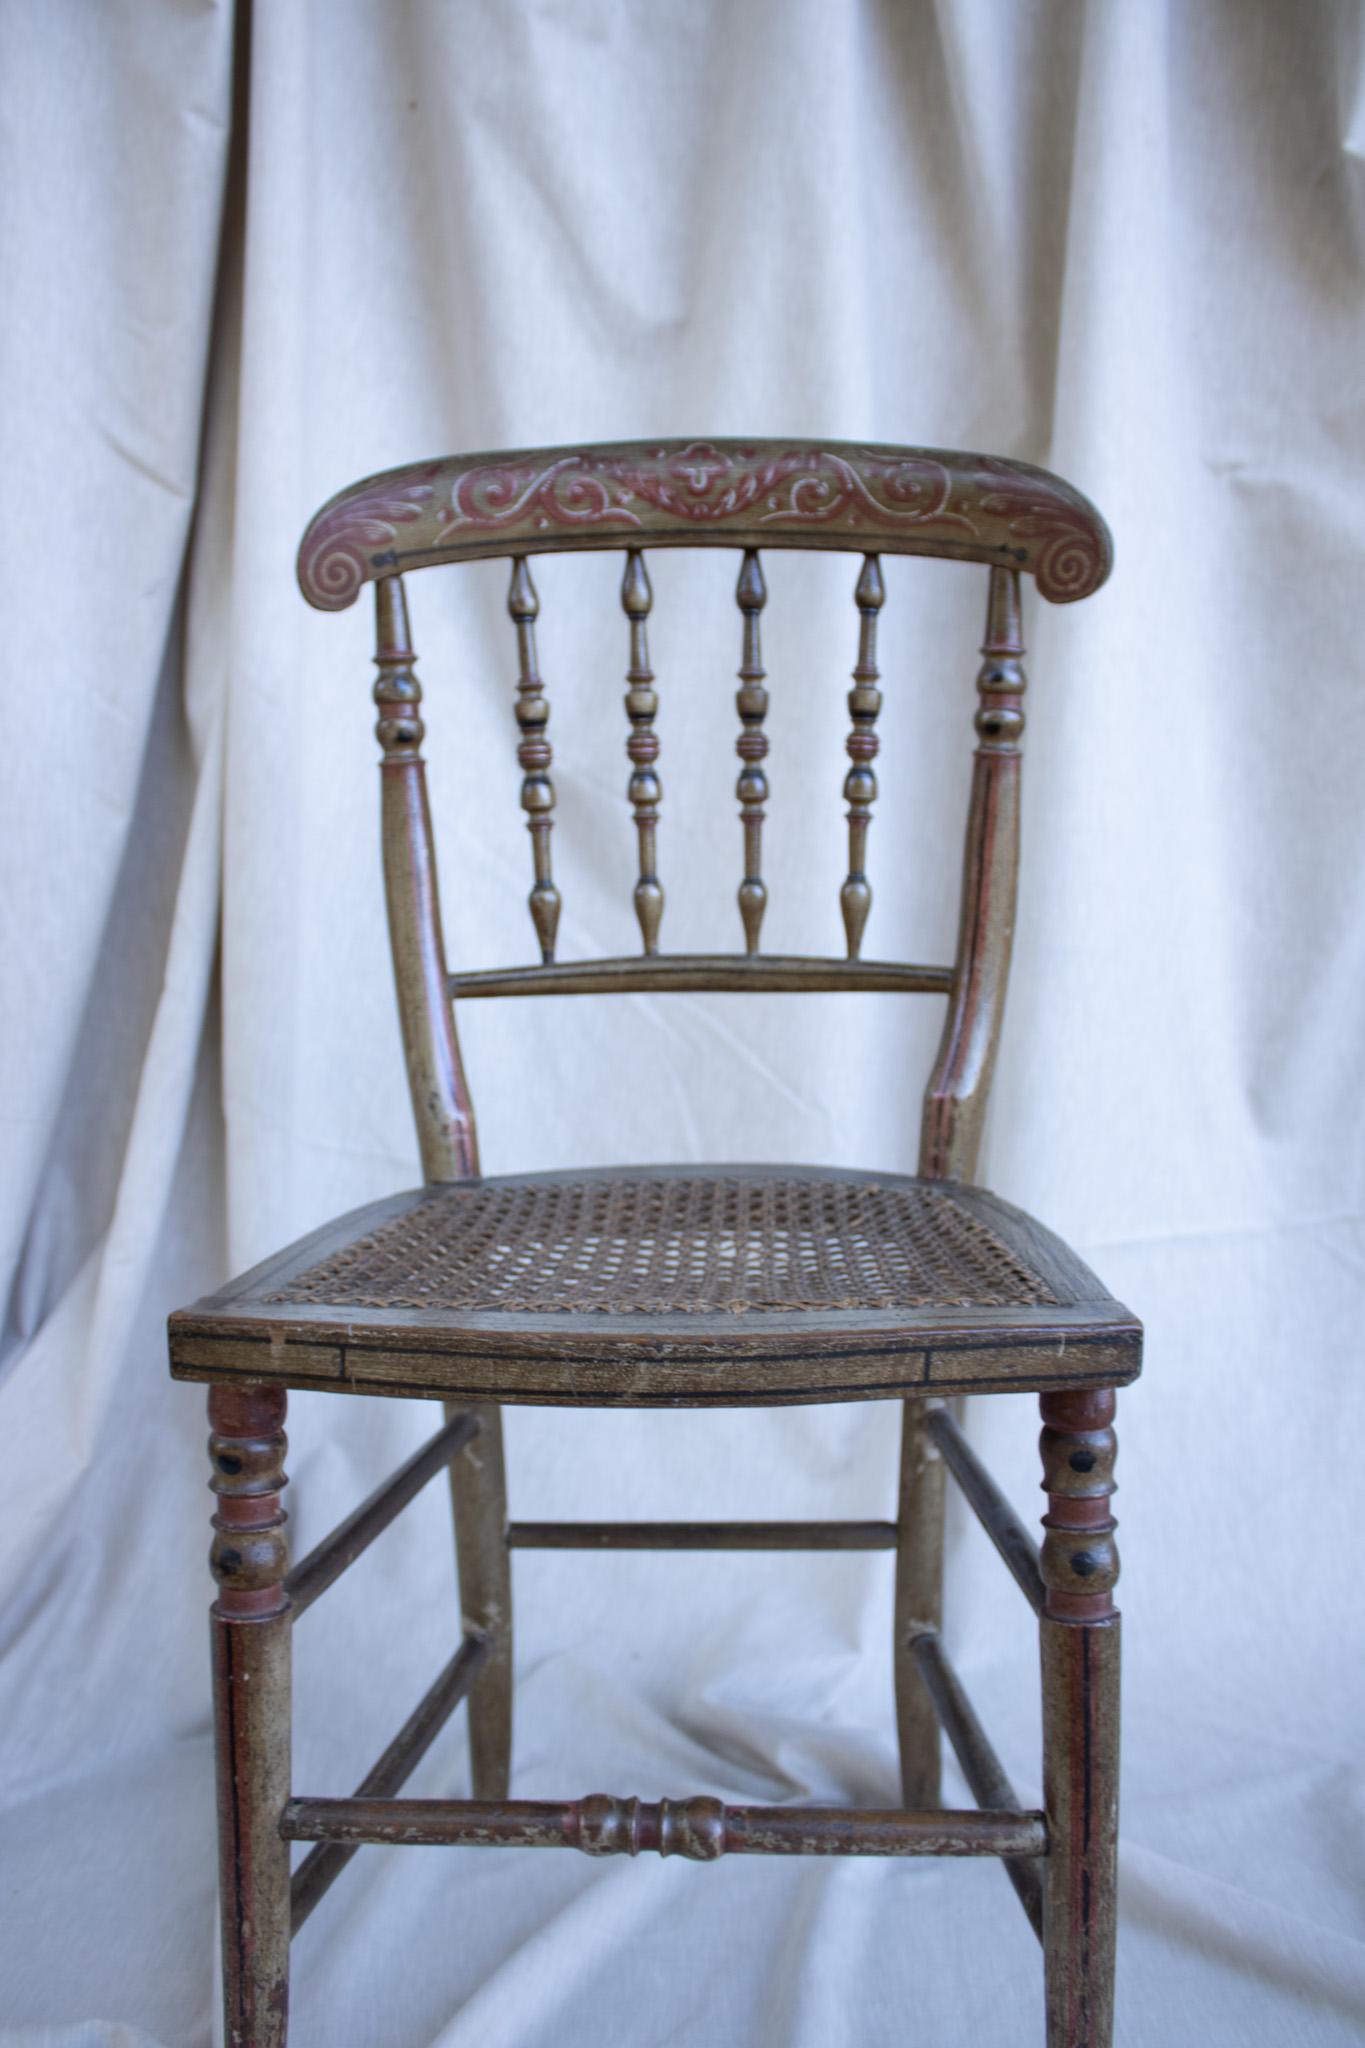 Pair of Painted Woodwork Chairs - XIX Century - Europe For Sale 2